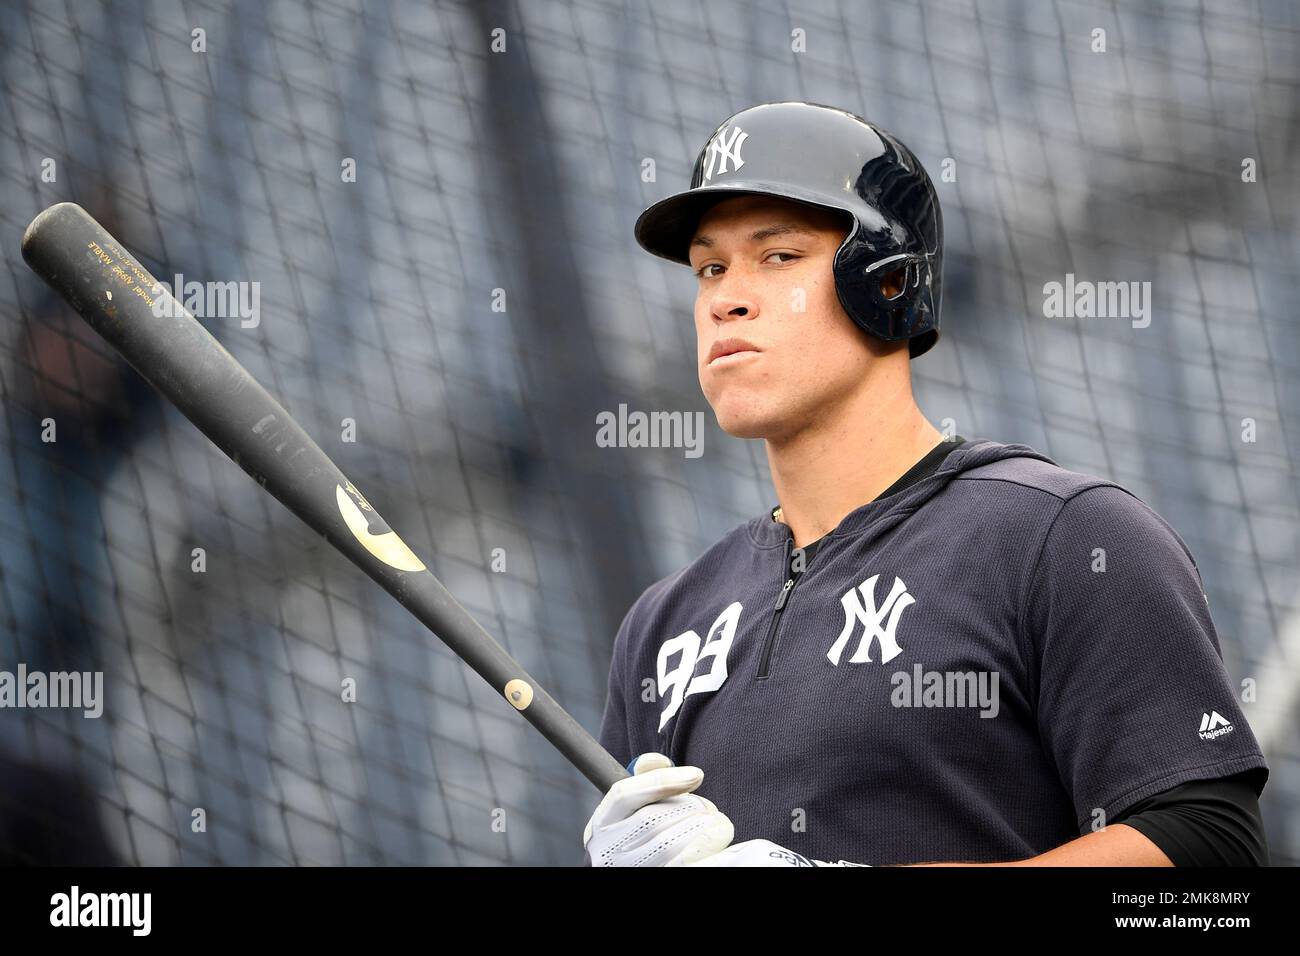 New York Yankees right fielder Aaron Judge stands on the field during batting  practice before an exhibition baseball game against the Washington  Nationals, Monday, March 25, 2019, in Washington. (AP Photo/Nick Wass